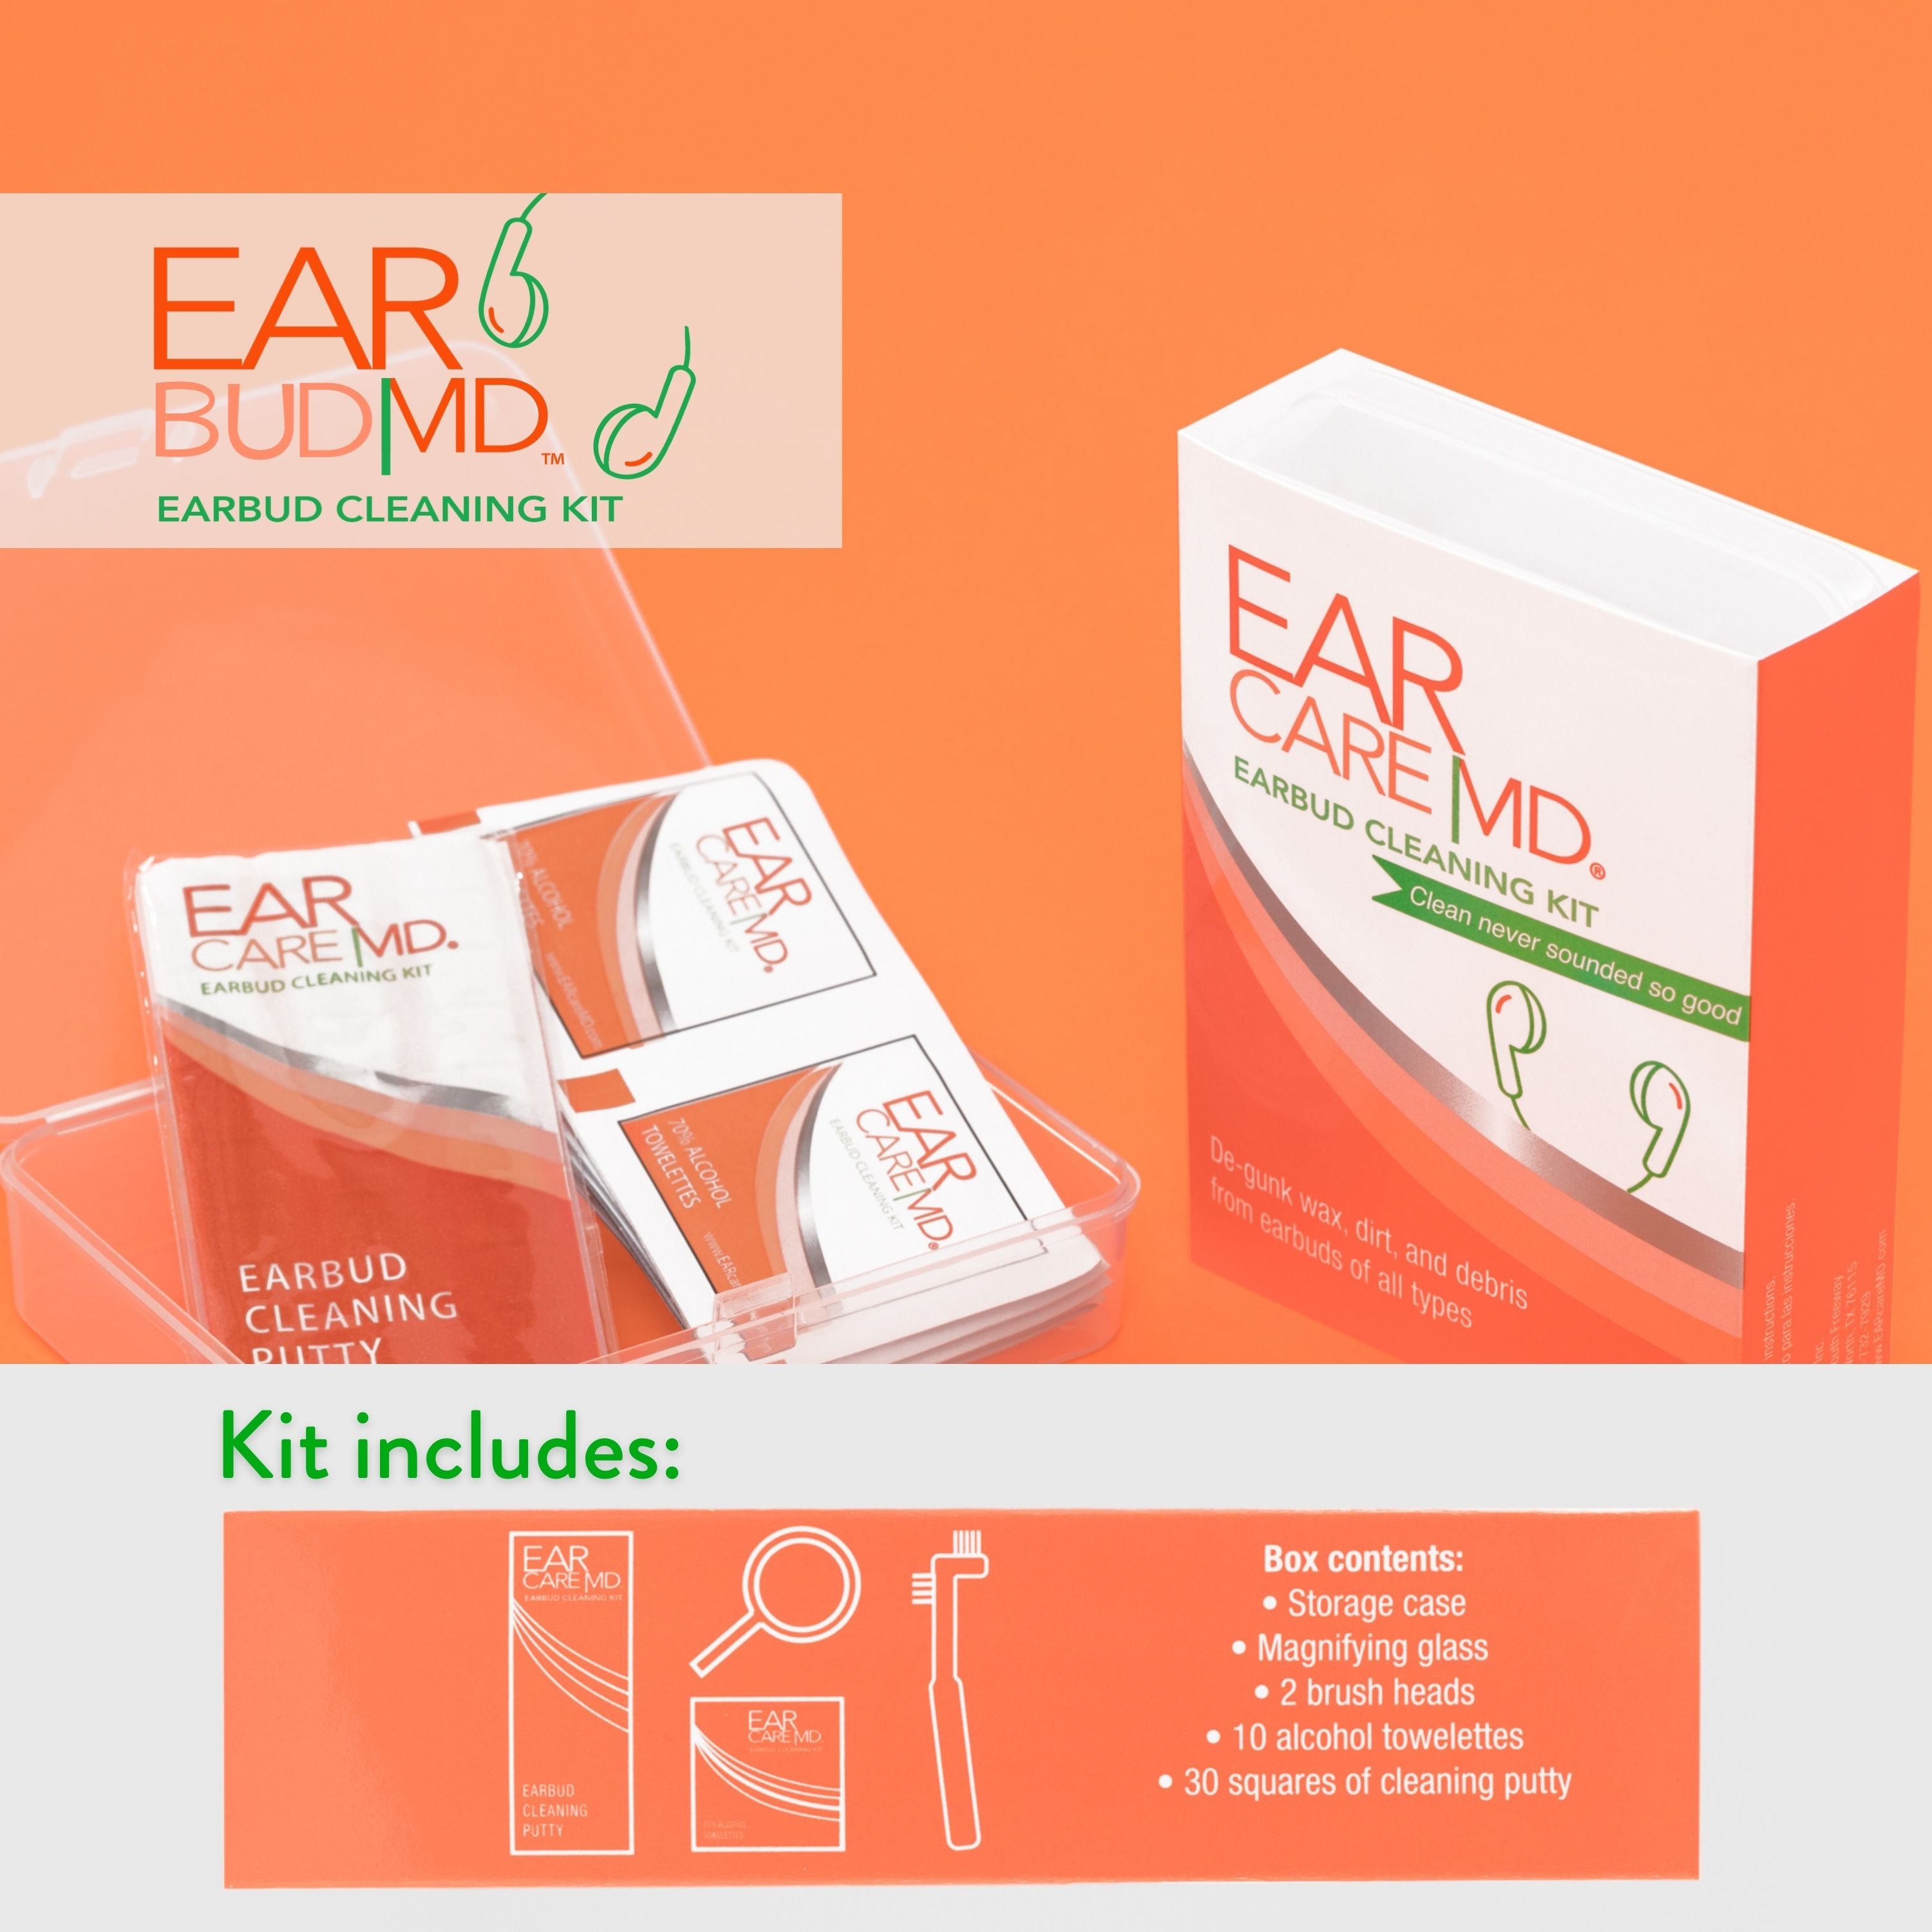 Ear Care MD Earbud Cleaning Kit